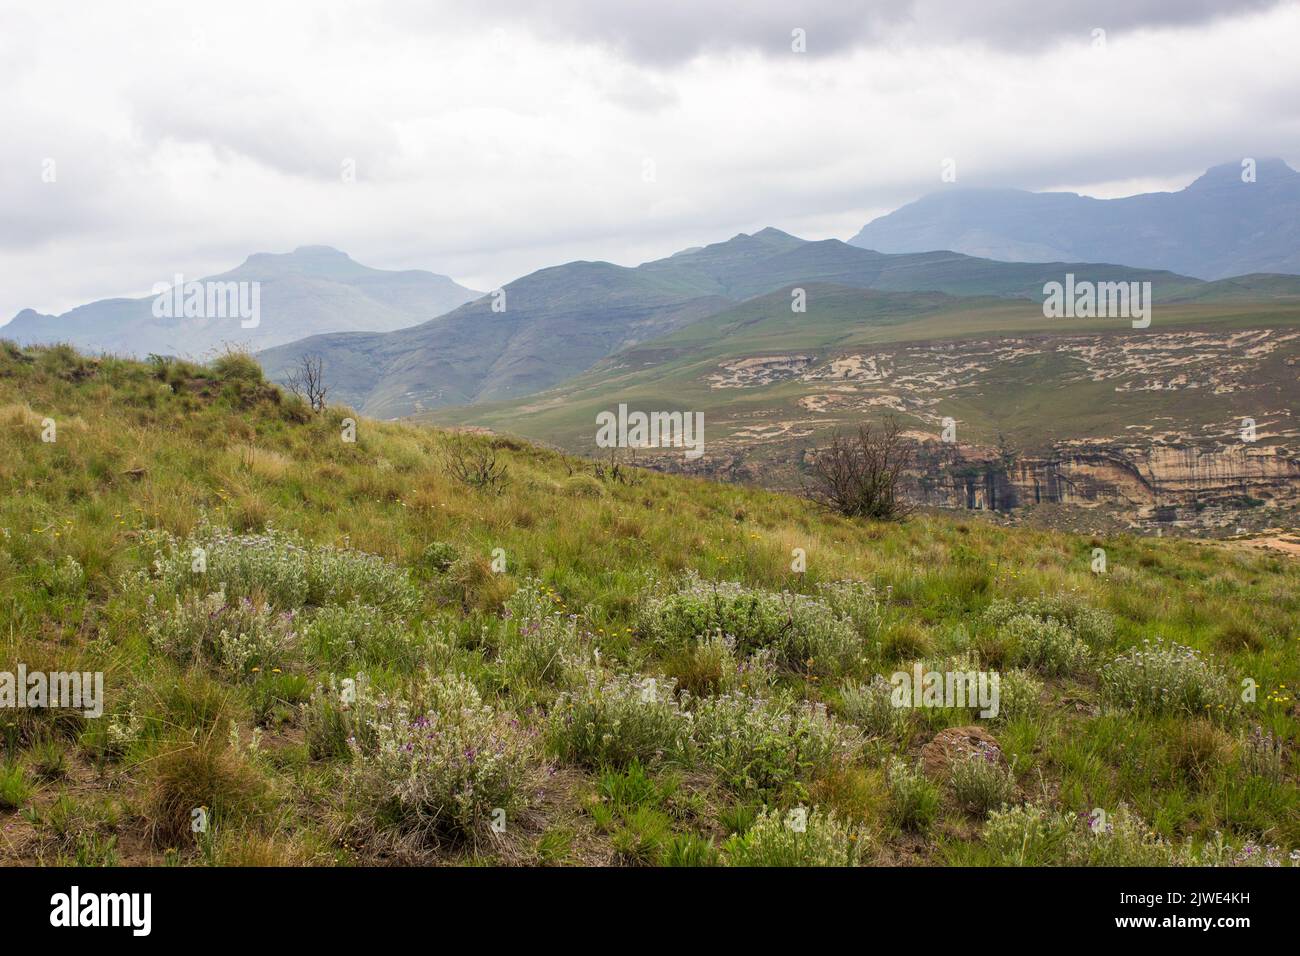 View over the Afro alpine grassland and wildflowers in the Drakensberg Mountains, with cloud covered high peaks in the Background Stock Photo